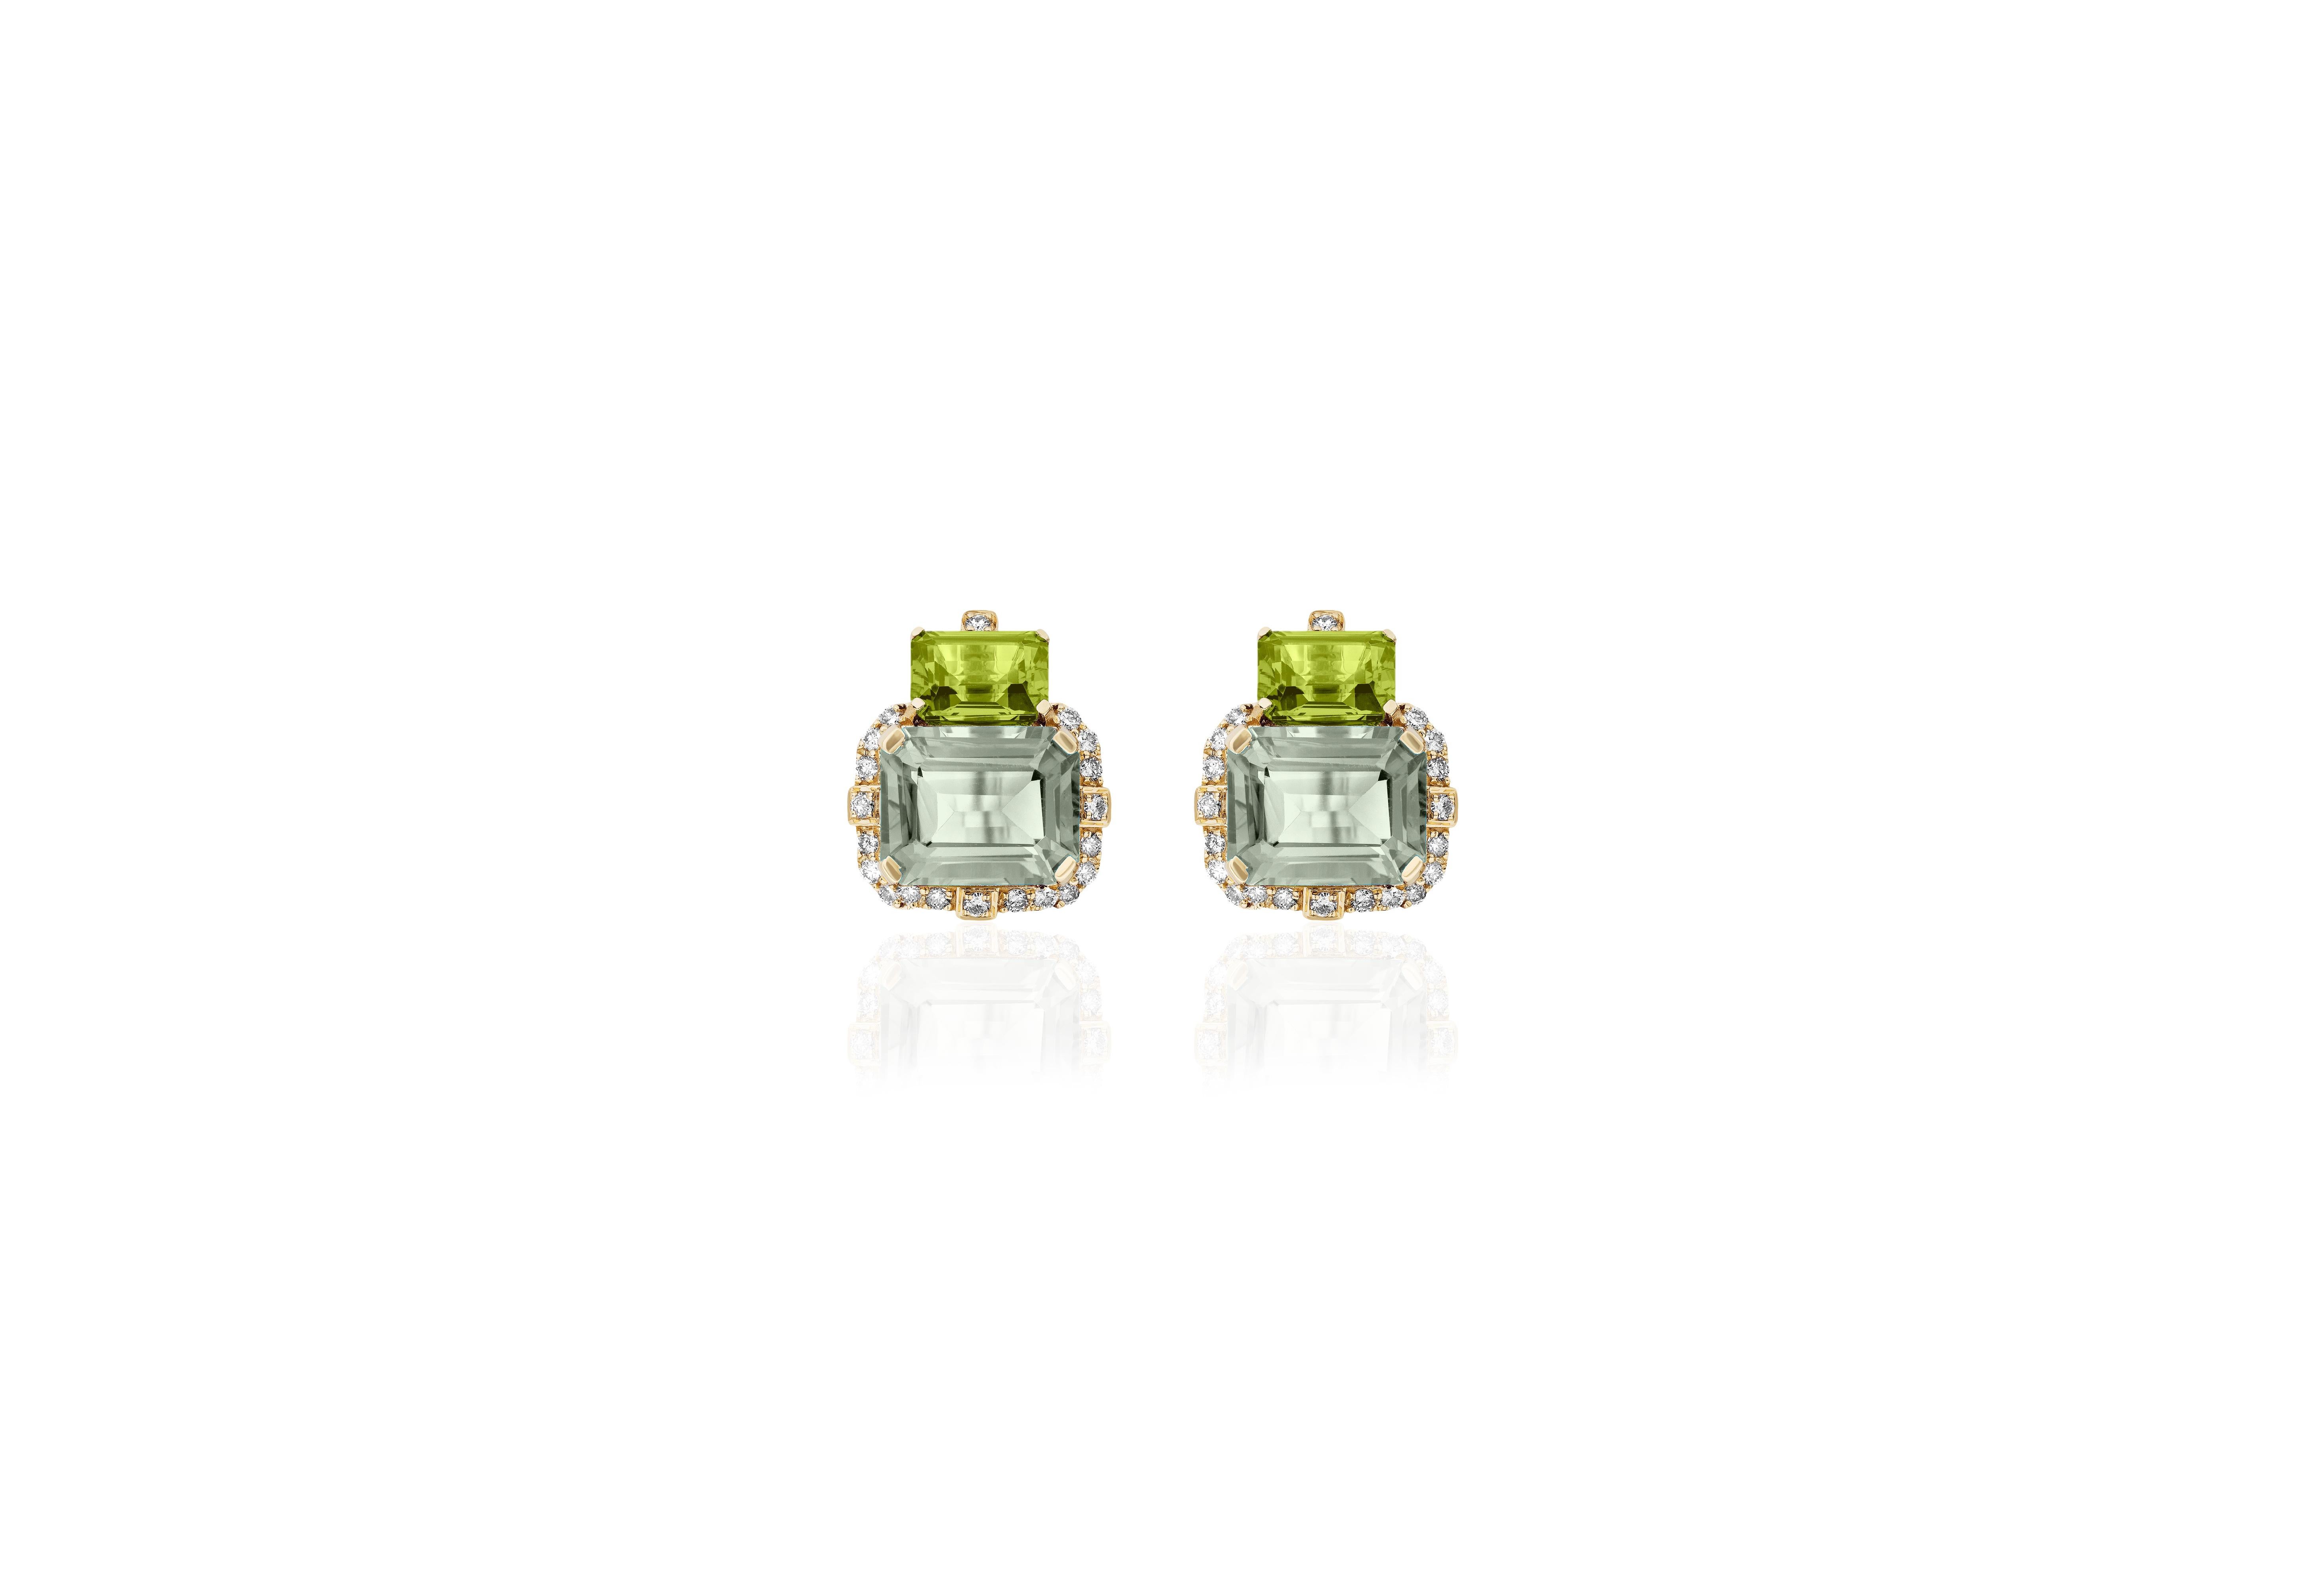 Introducing the captivating 2 Stone Peridot and Prasiolite Emerald Cut Earrings with Diamonds in 18K Yellow Gold, a remarkable creation from the exquisite 'Gossip' Collection. Crafted with meticulous attention to detail, these earrings embody